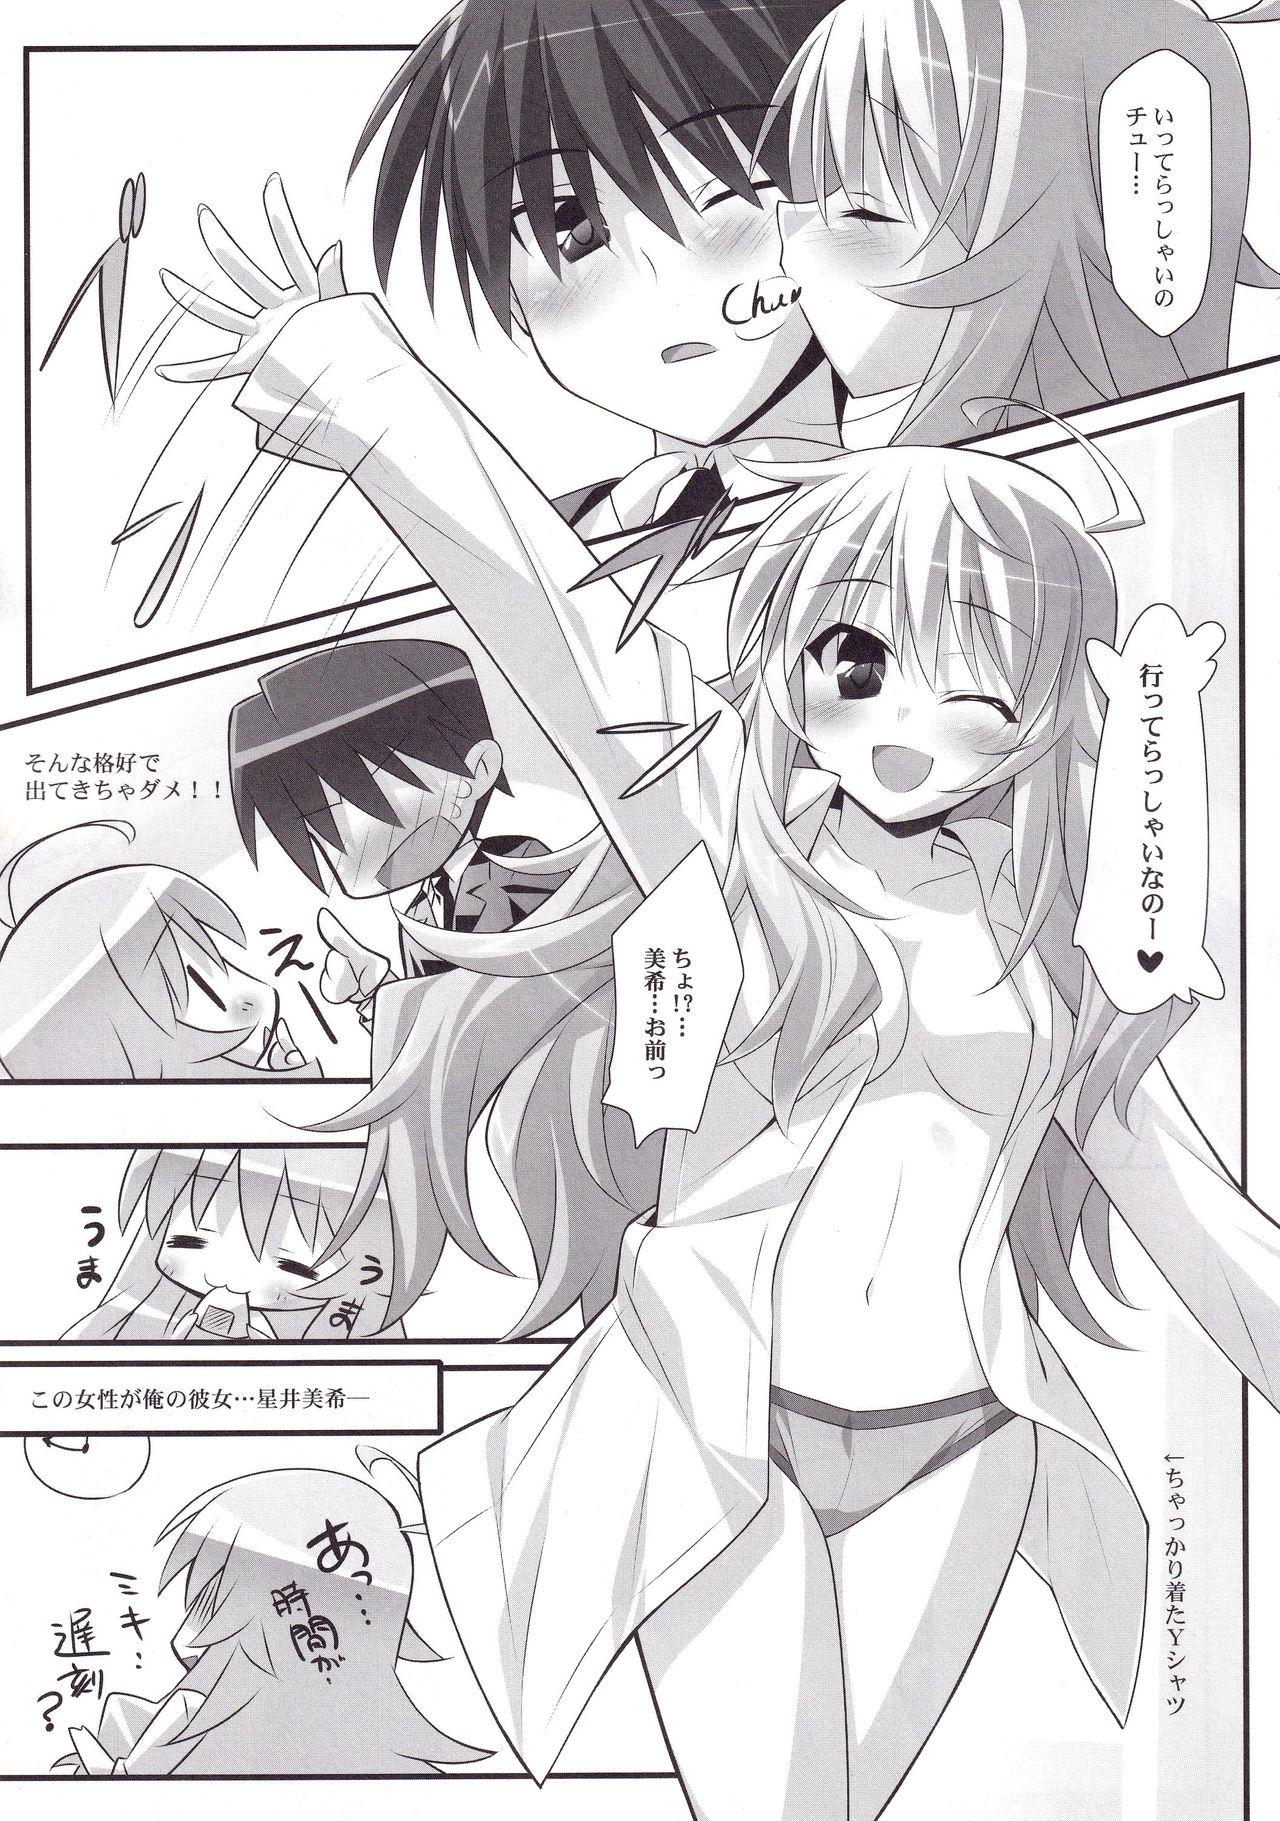 Jerking Off Non Stop Girl - The idolmaster Perra - Page 4